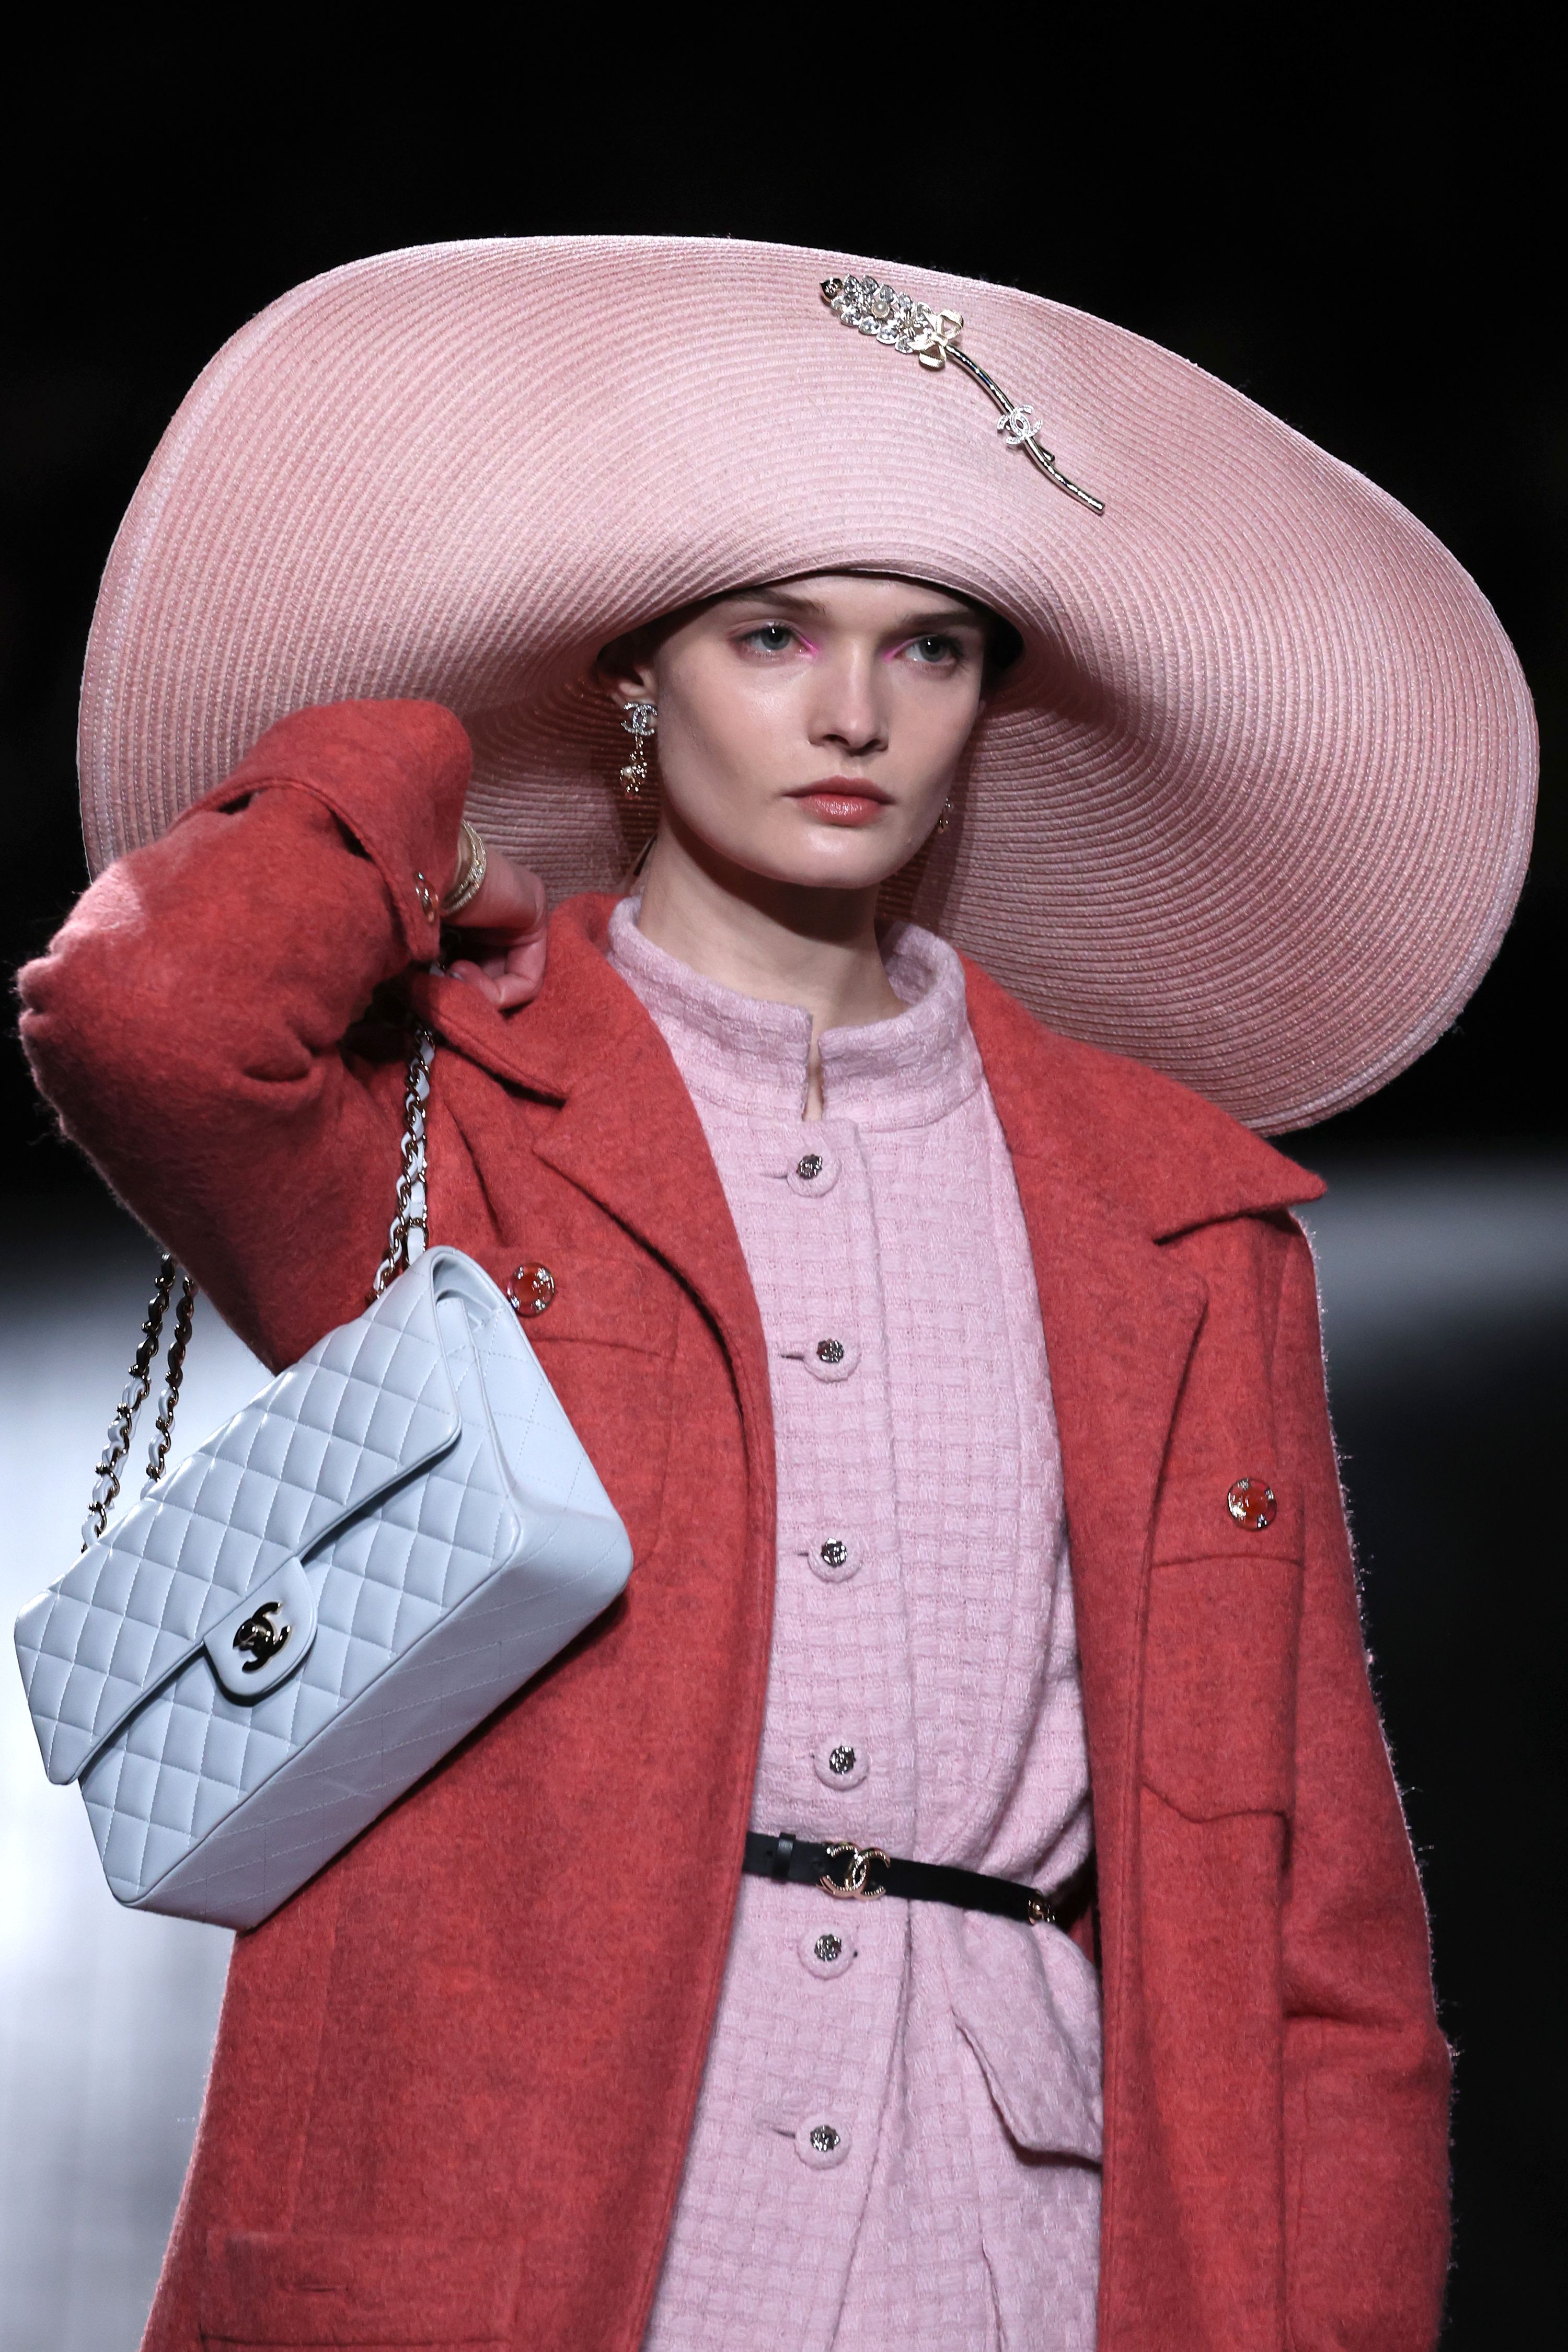 The show was inspired by Deauville, the French beach resort Coco Chanel first visited in 1913.